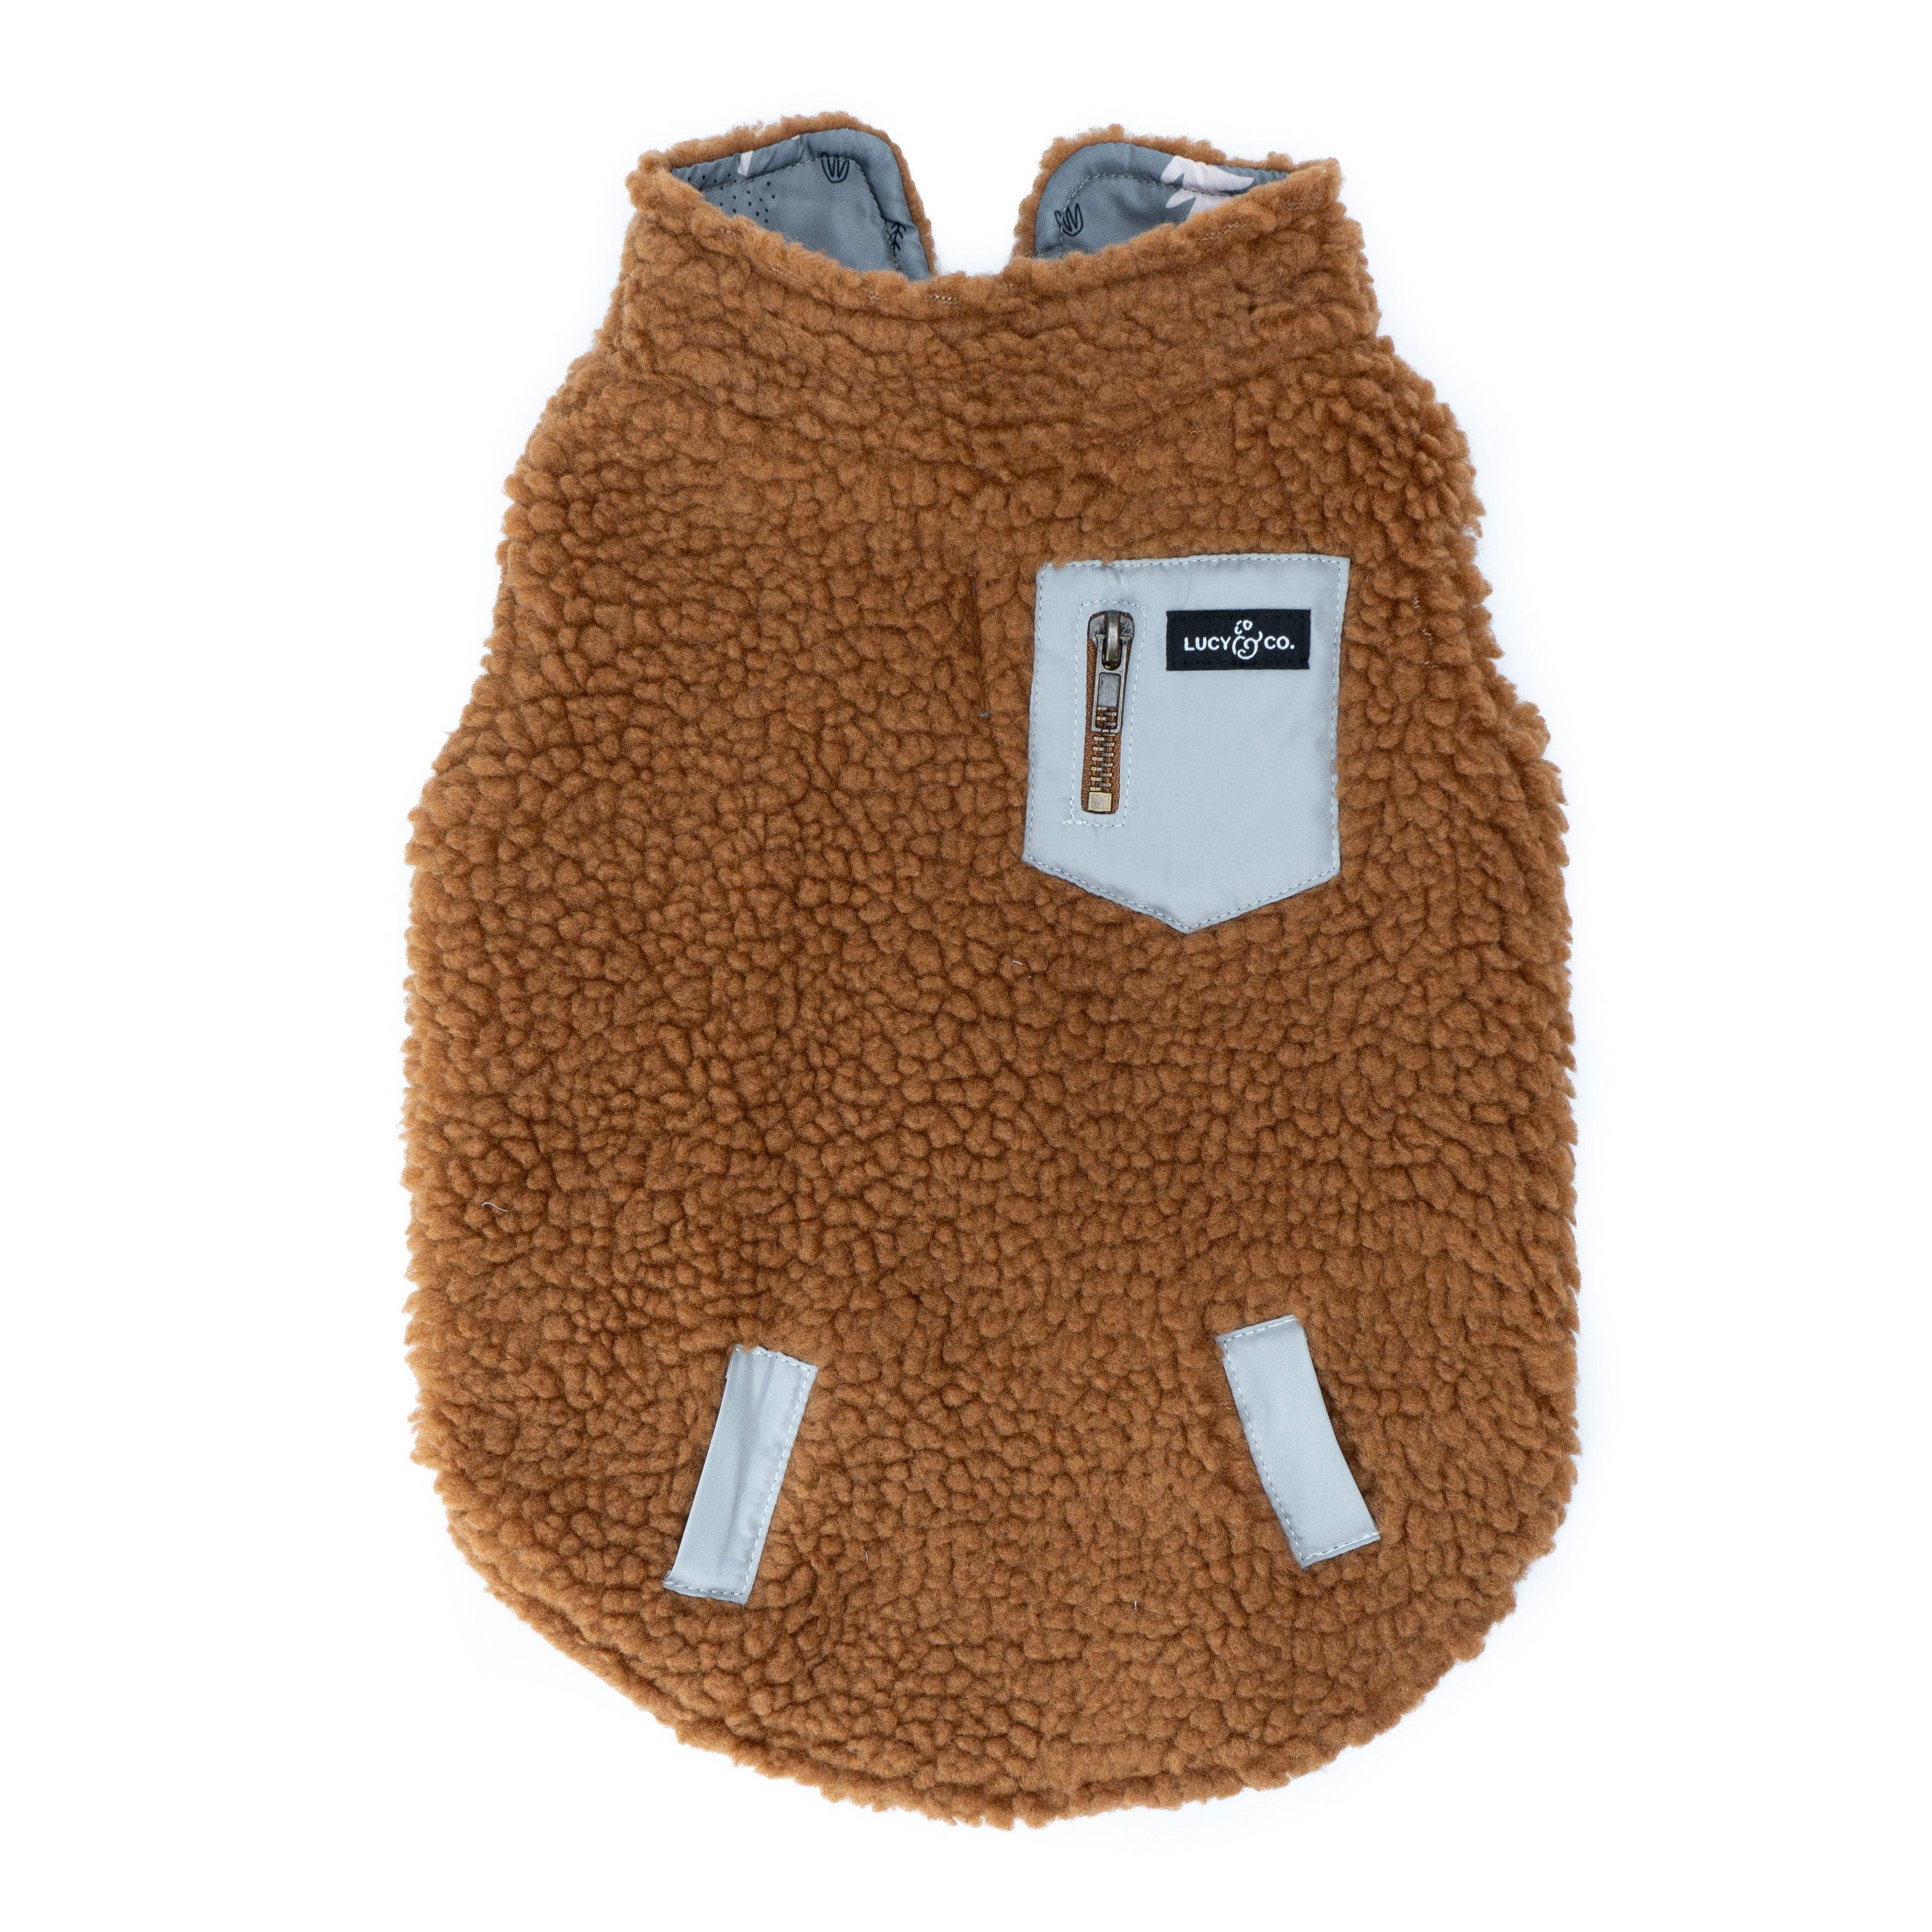 The Take a Hike Reversible Teddy Vest: Large